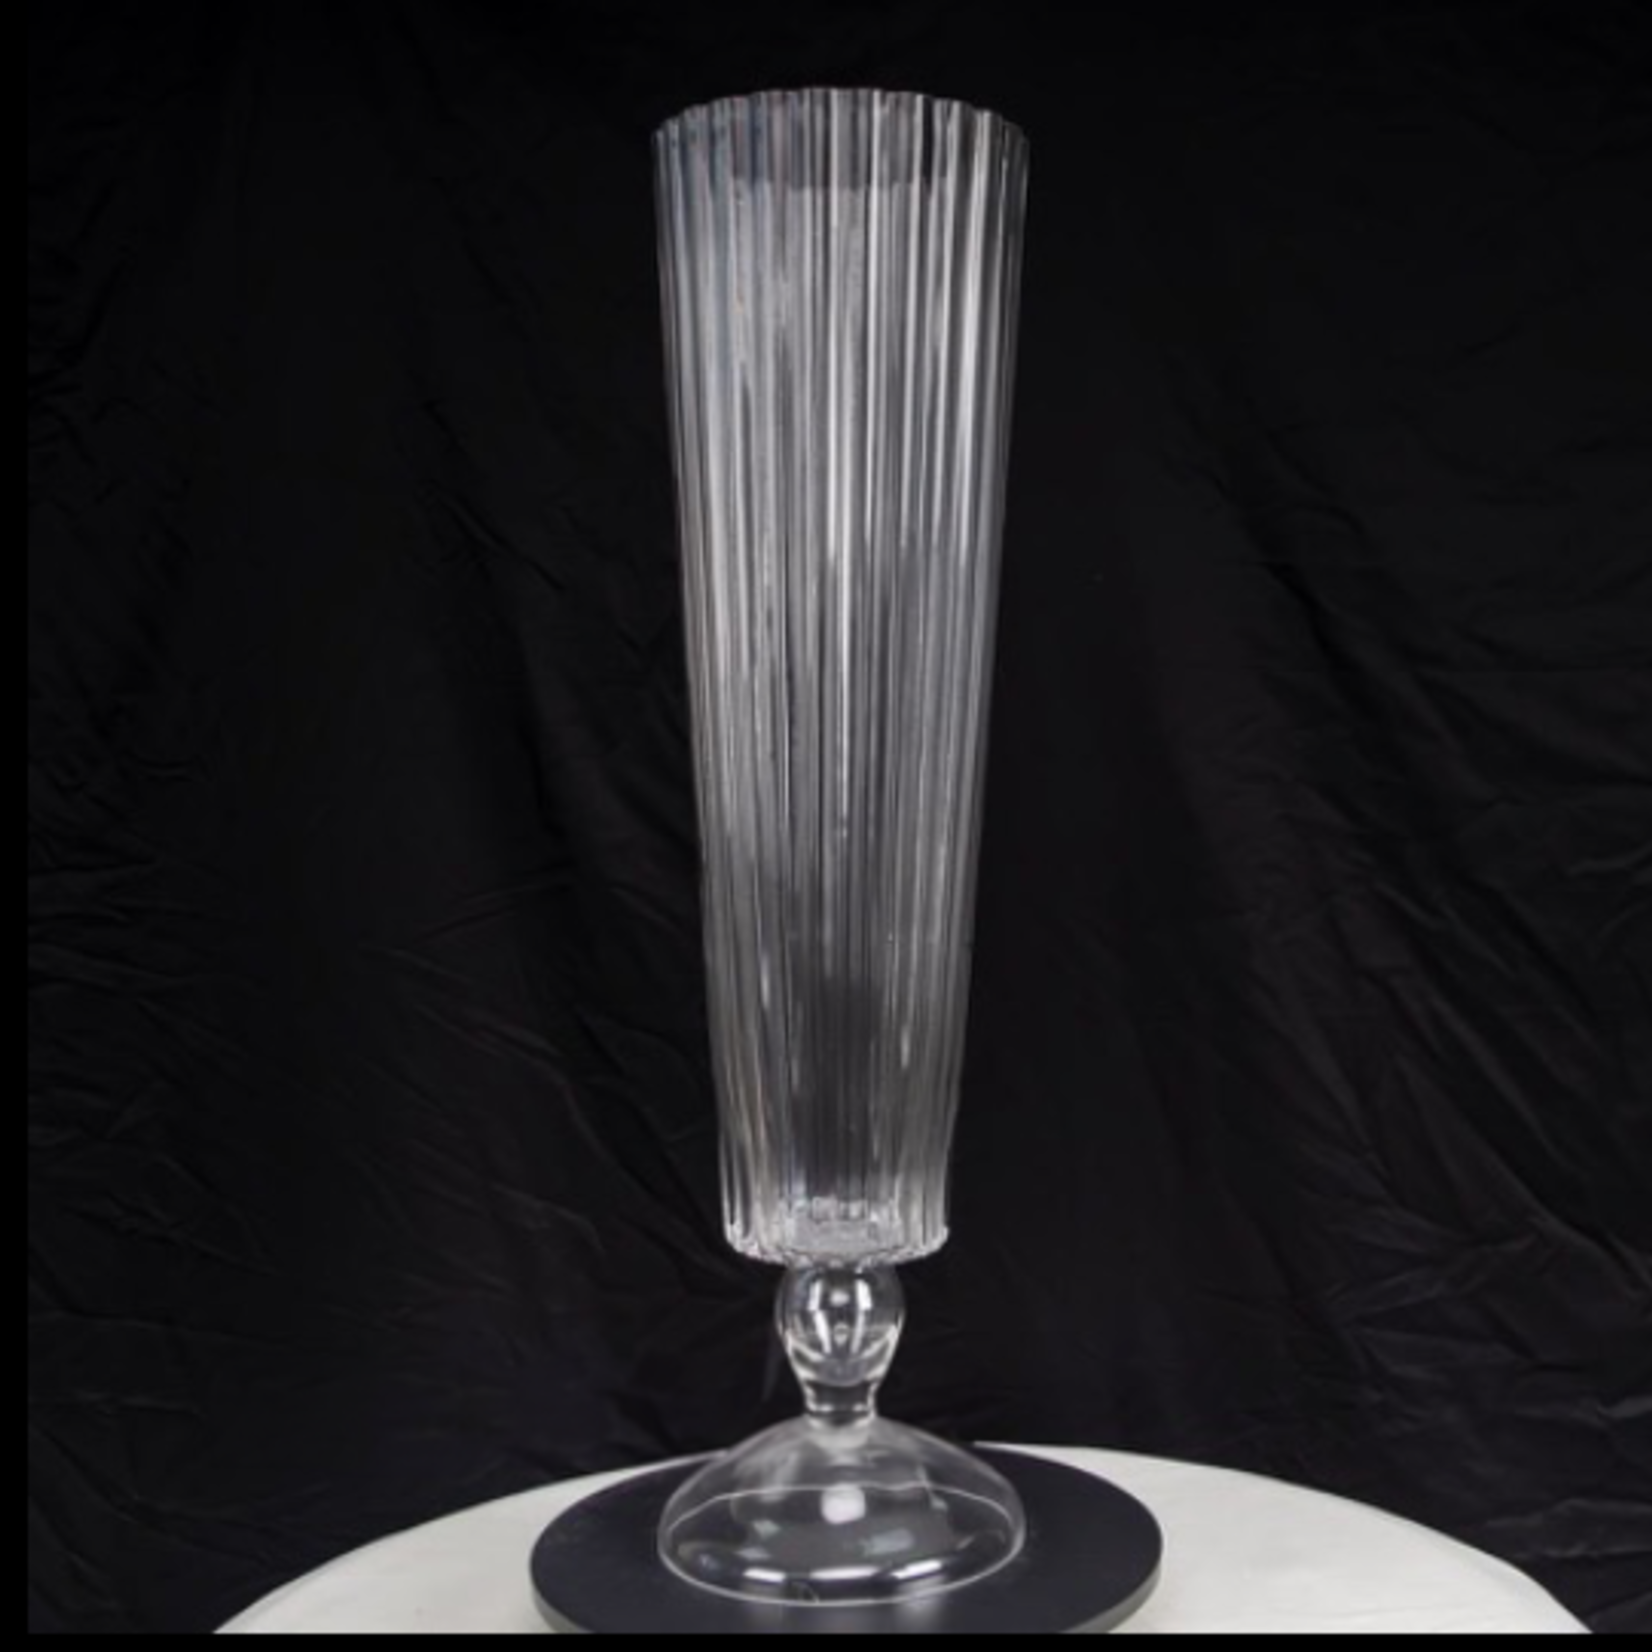 50% off was $130 now $65. 31.5”H X 6.5” GLASS FLUTED BESPOKE LIKE TRUMPET VASE